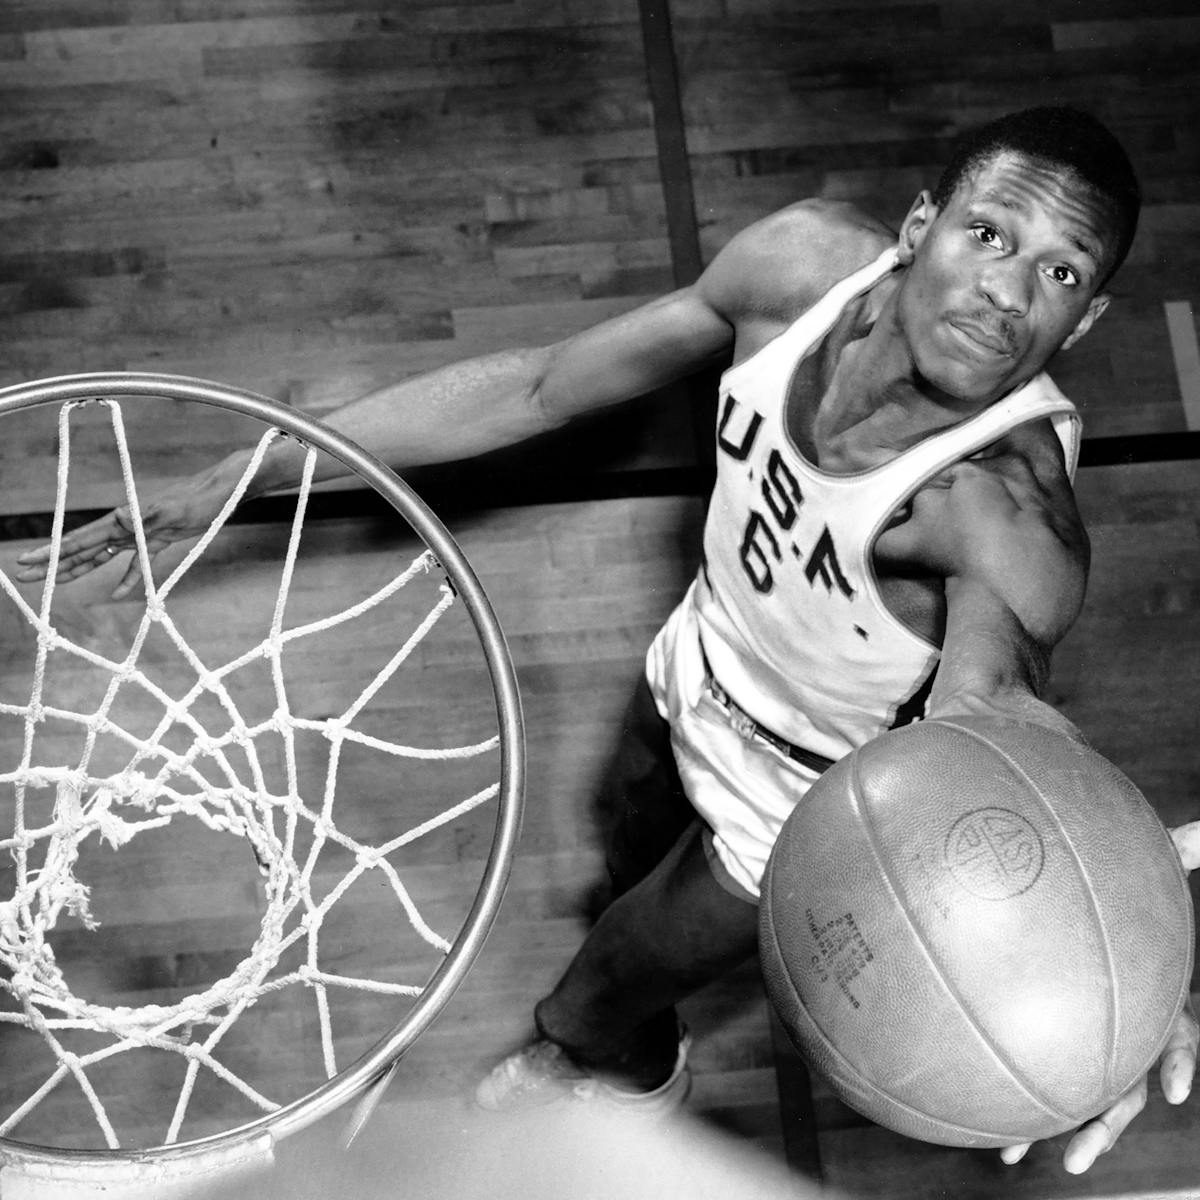 A black-and-white shot of Bill Russell from above, as he is about to lay the ball into the hoop.